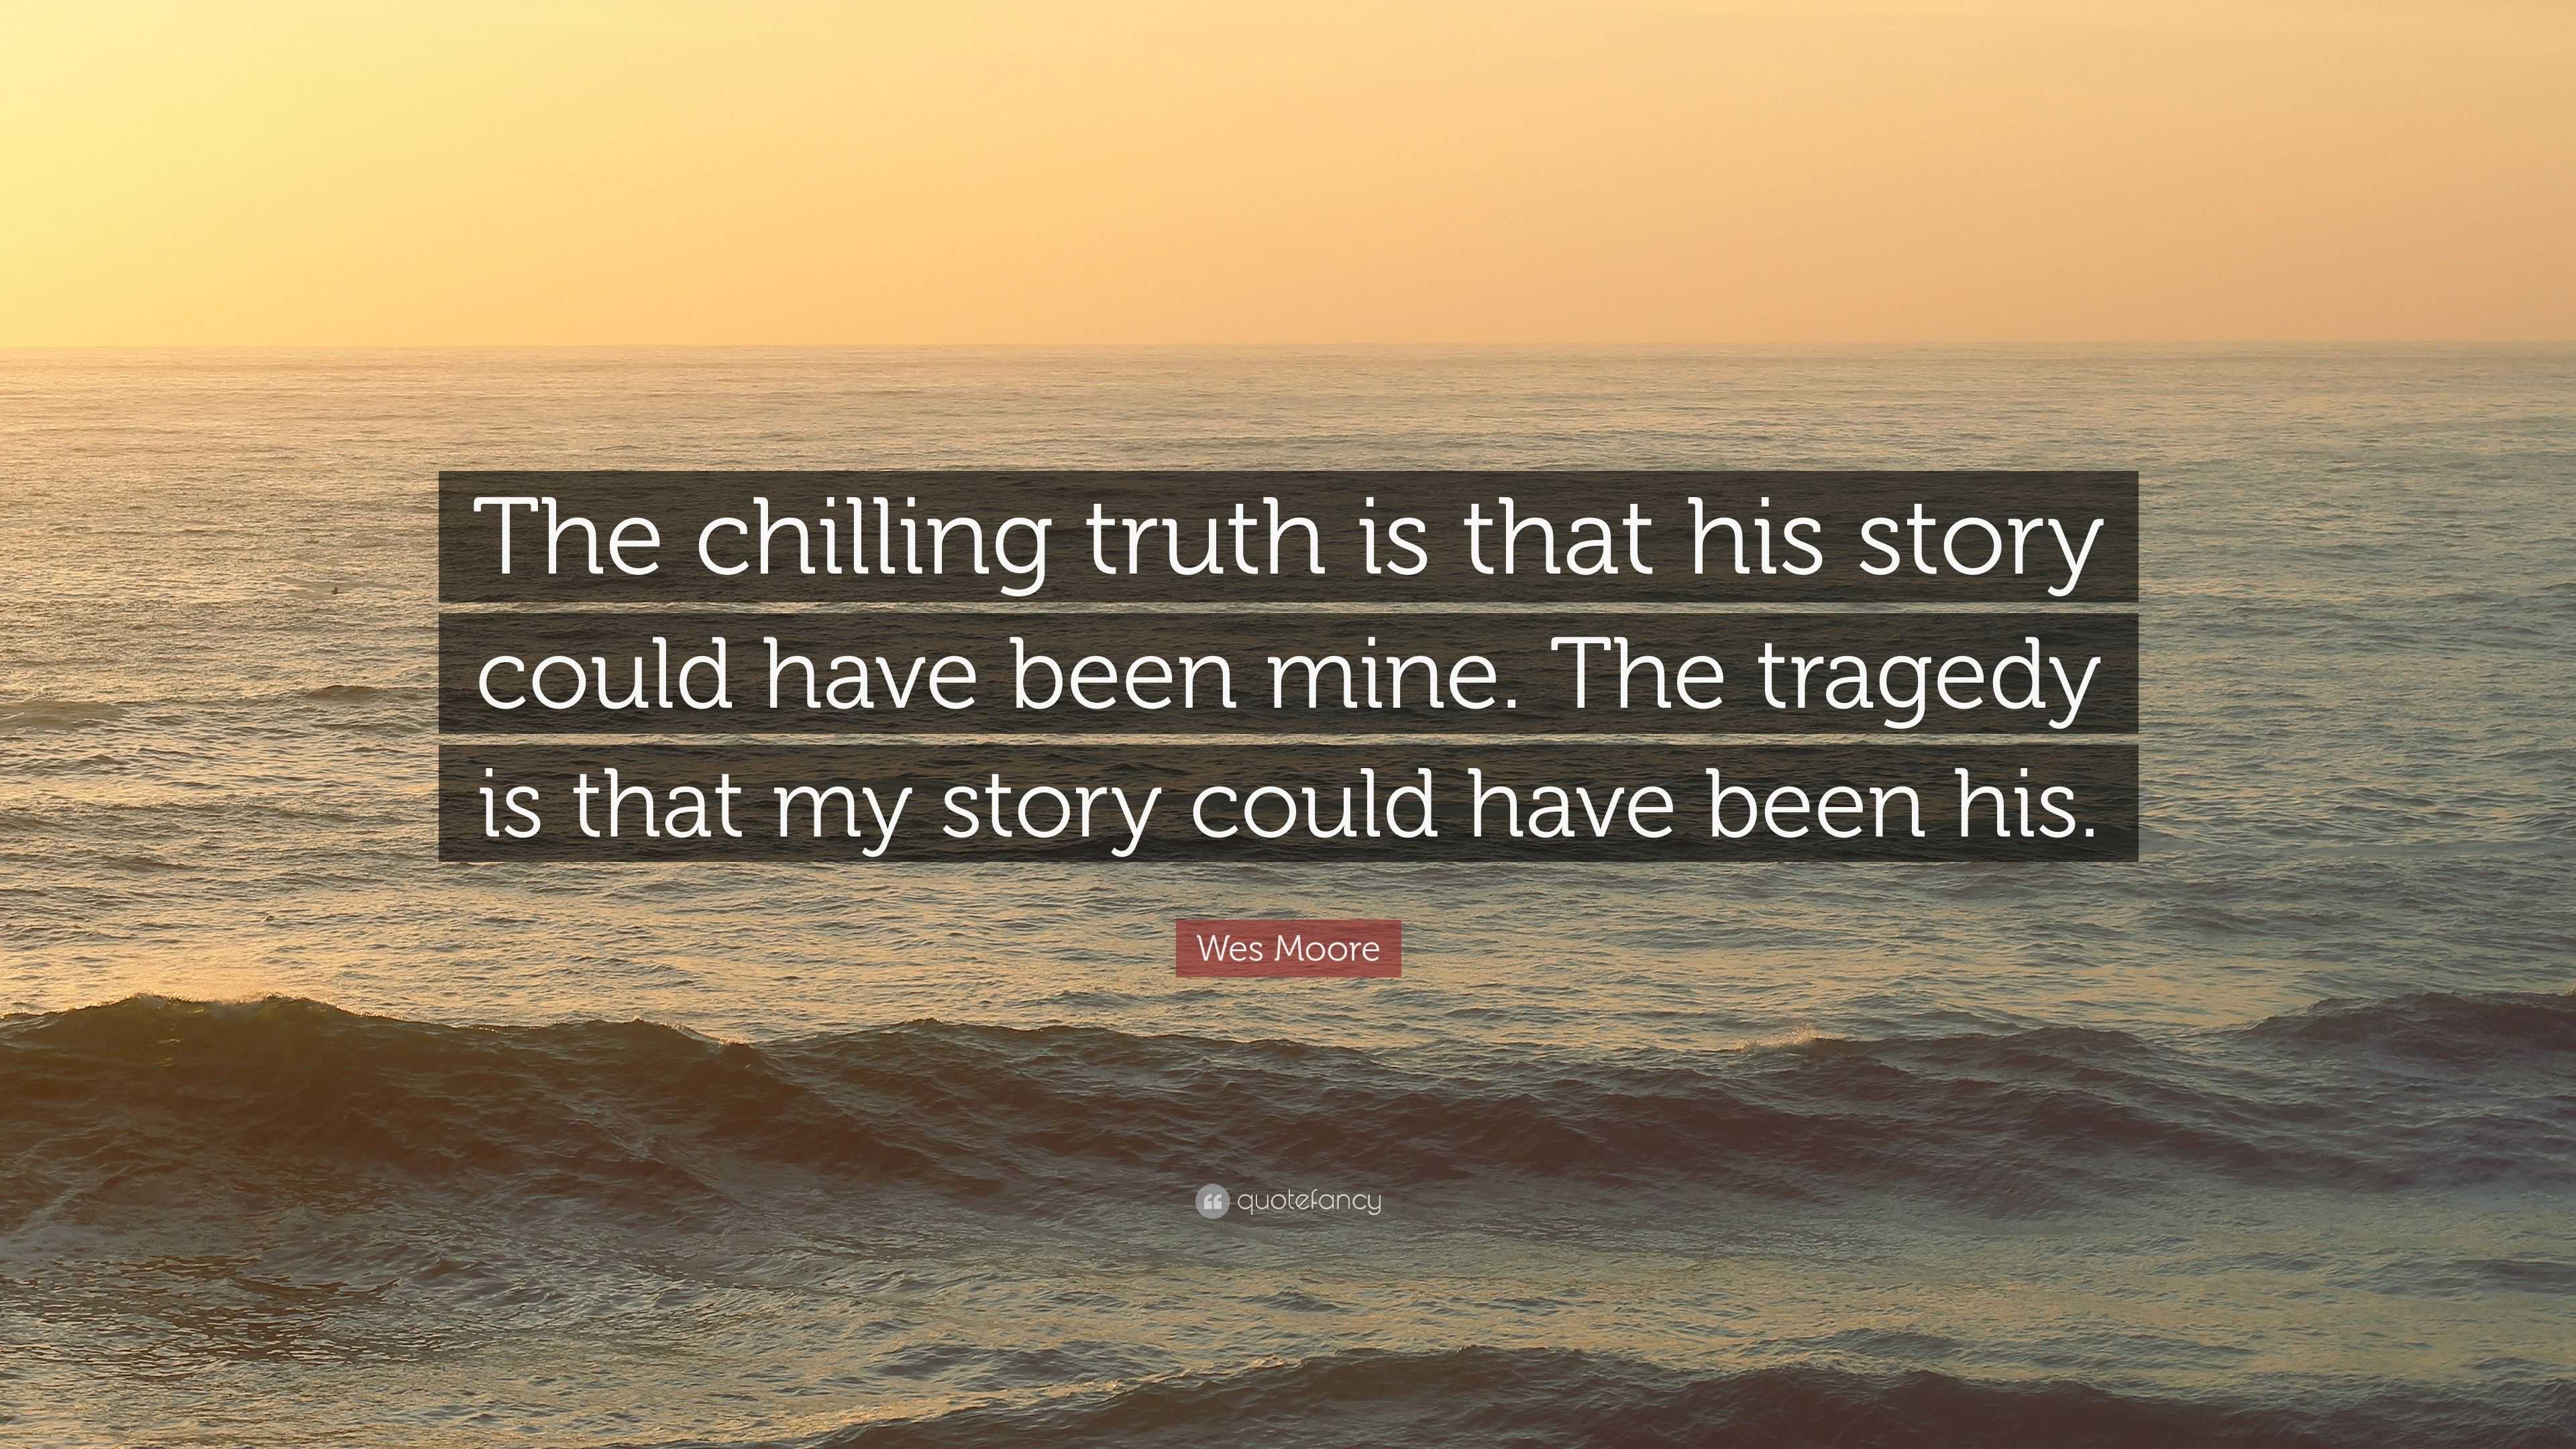 Wes Moore Quote: “The chilling truth is that his story could have been